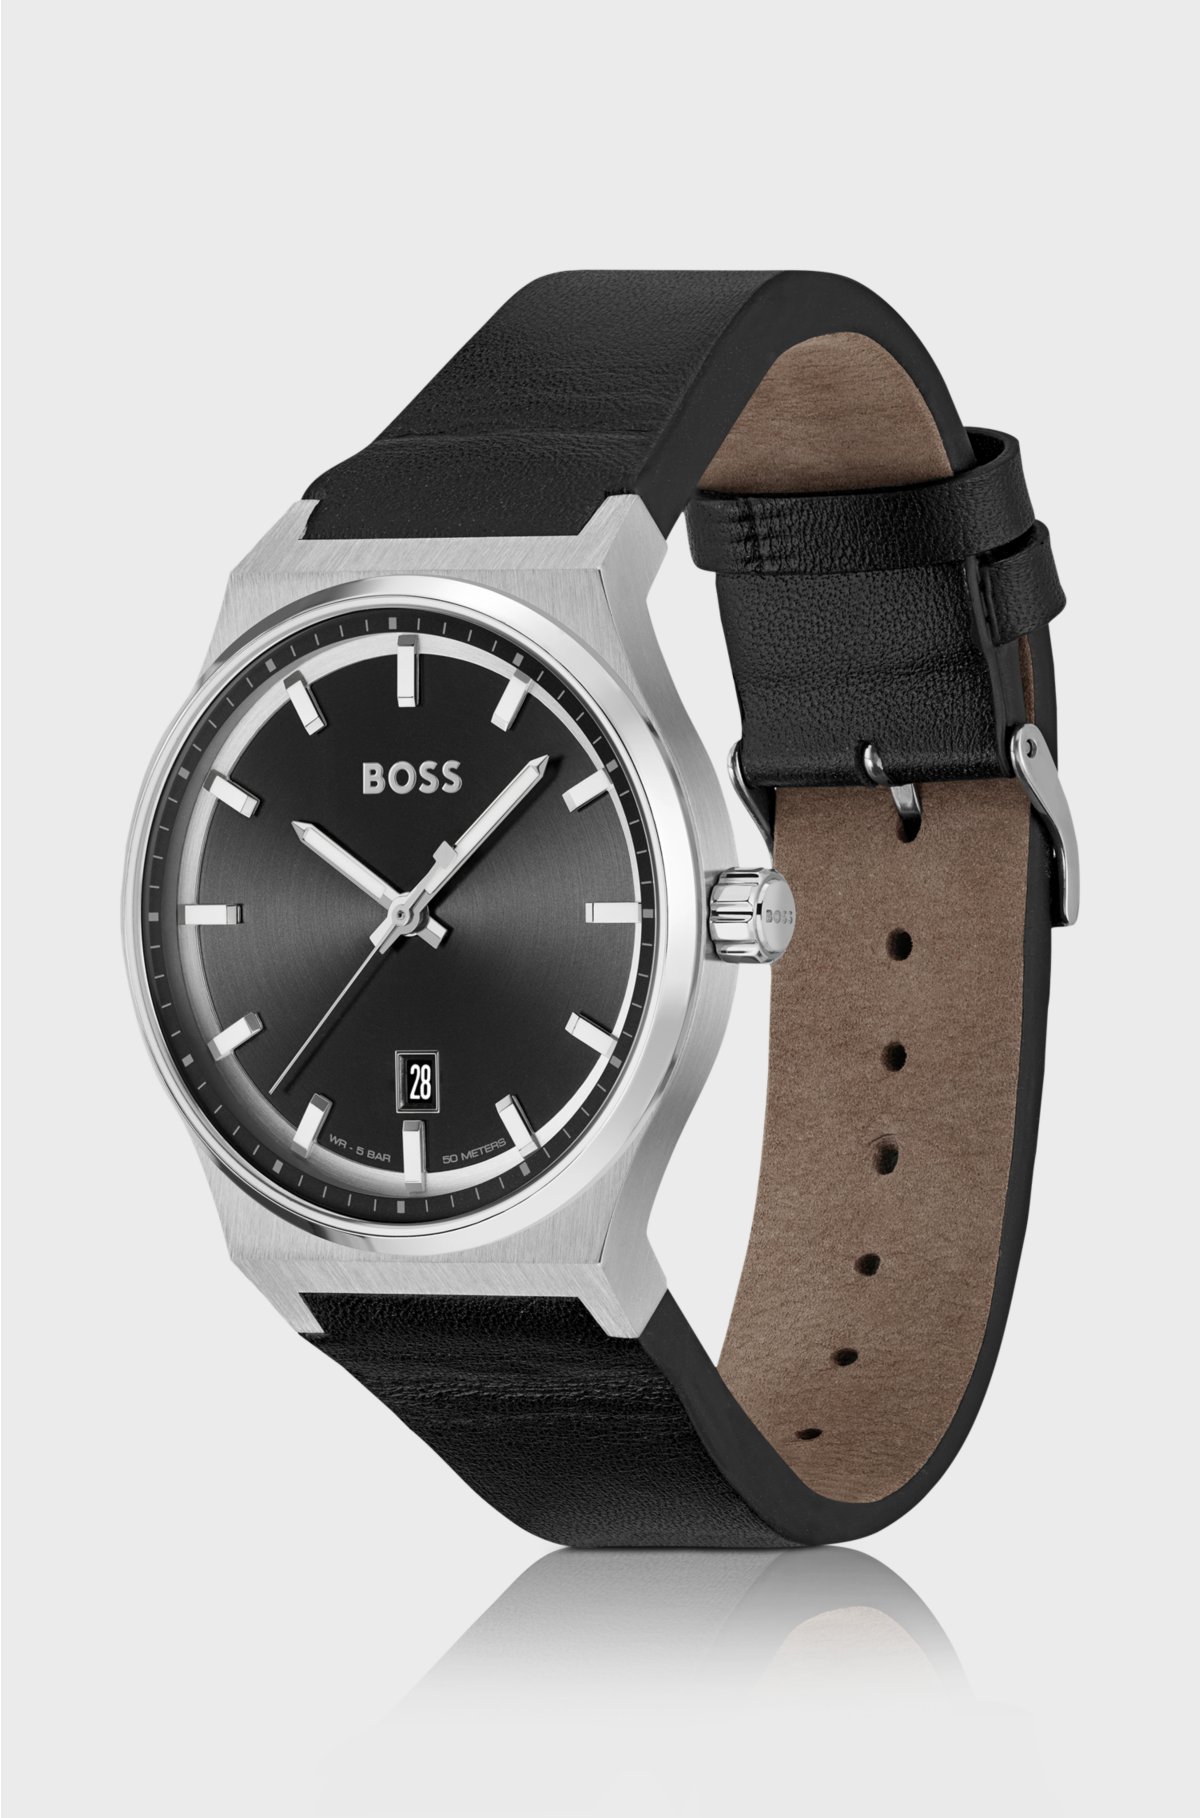 Black-dial watch with leather strap, Black